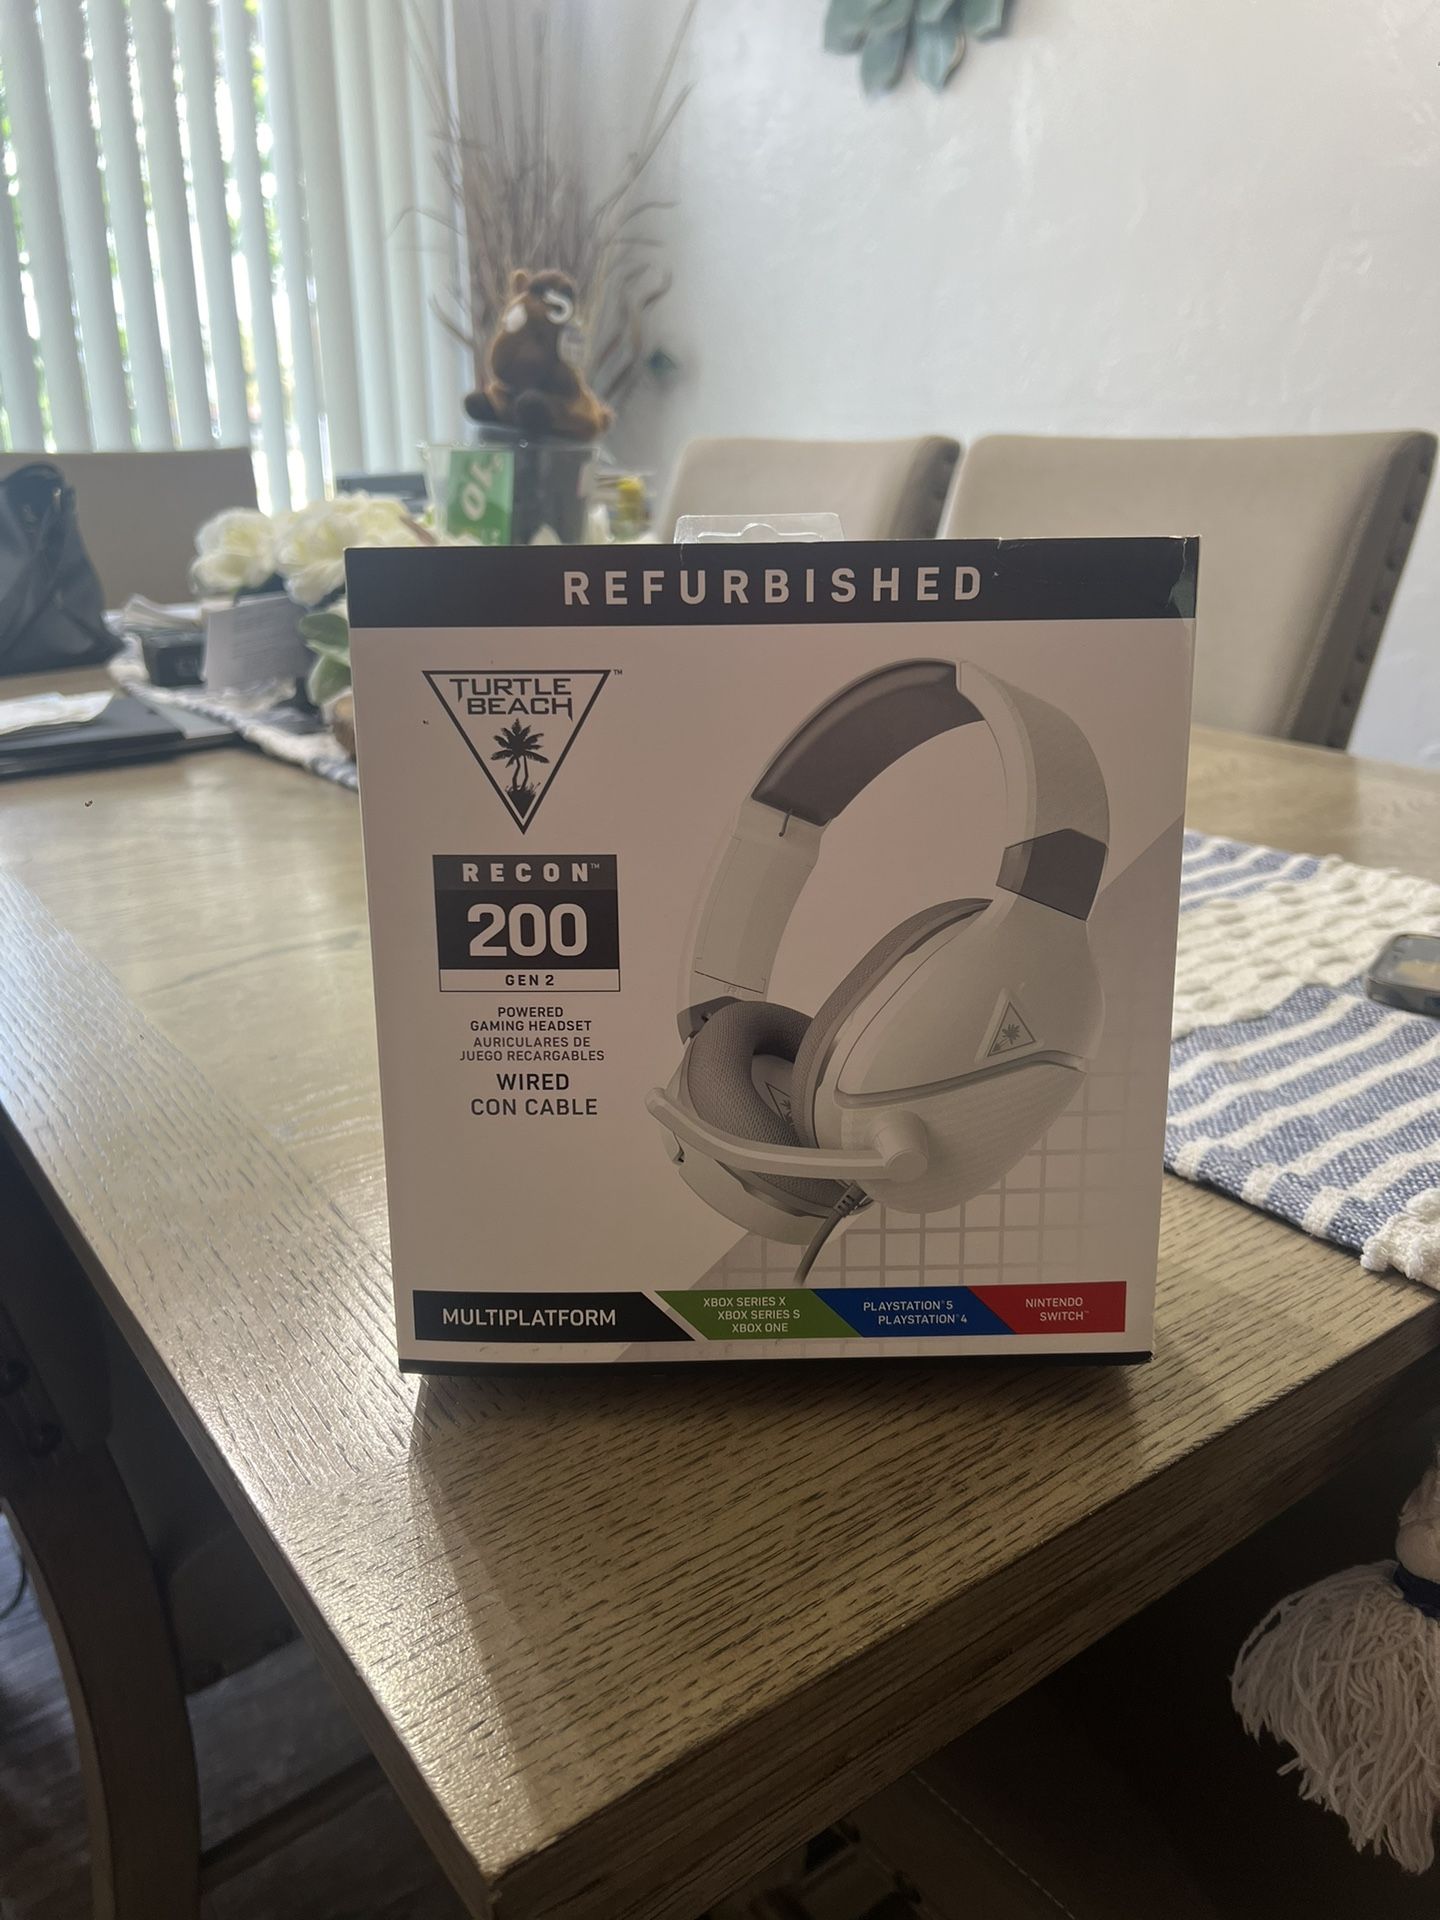 Turtle Beach Recon 200 “Gaming Headset”